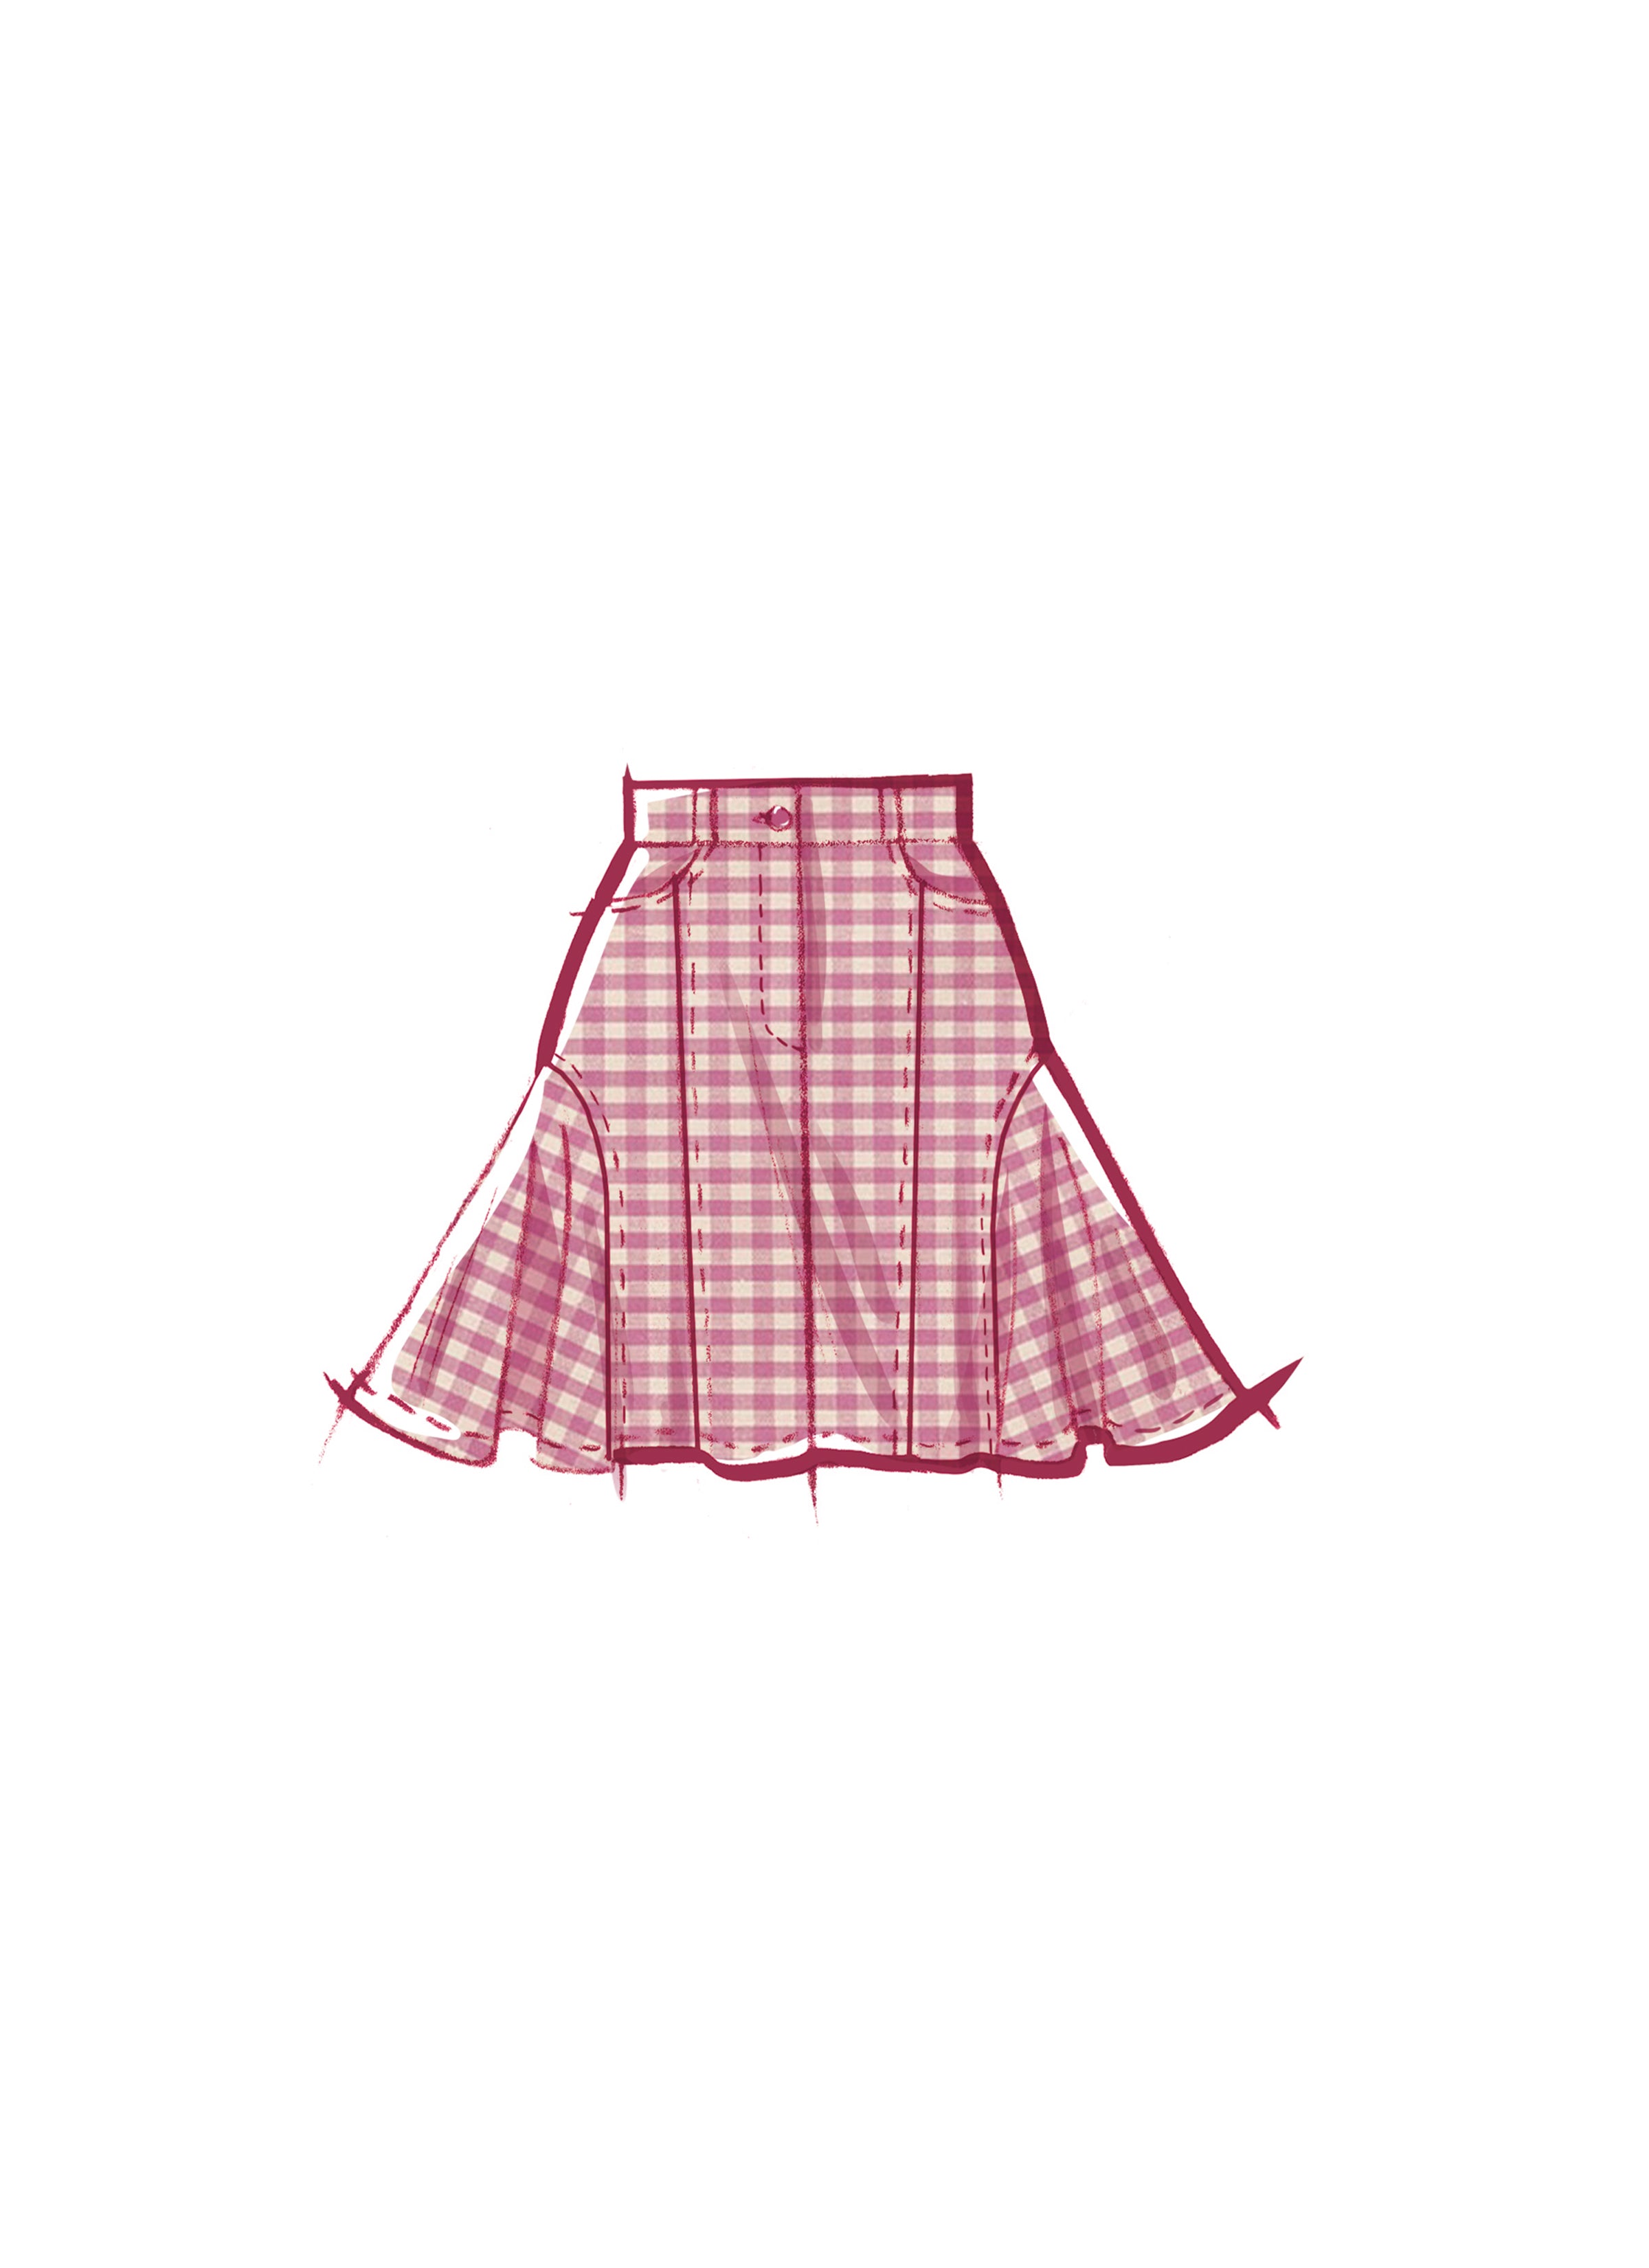 McCall's Sewing Pattern 8480 Misses' Skirt in Three Lengths from Jaycotts Sewing Supplies